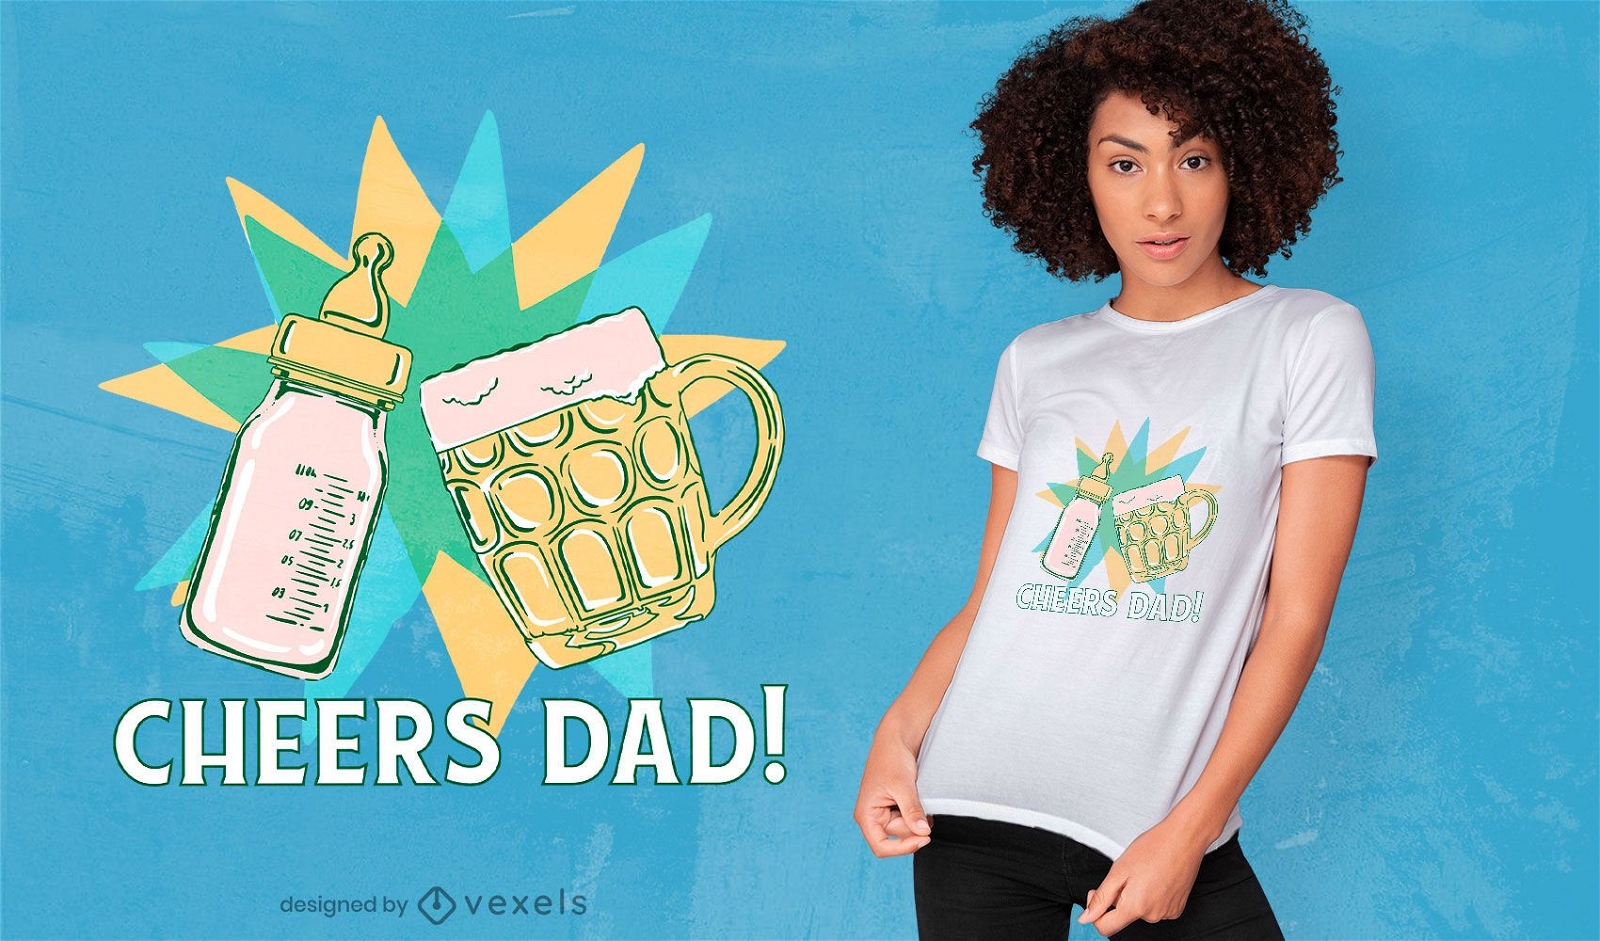 Cheers bottle and beer t-shirt design